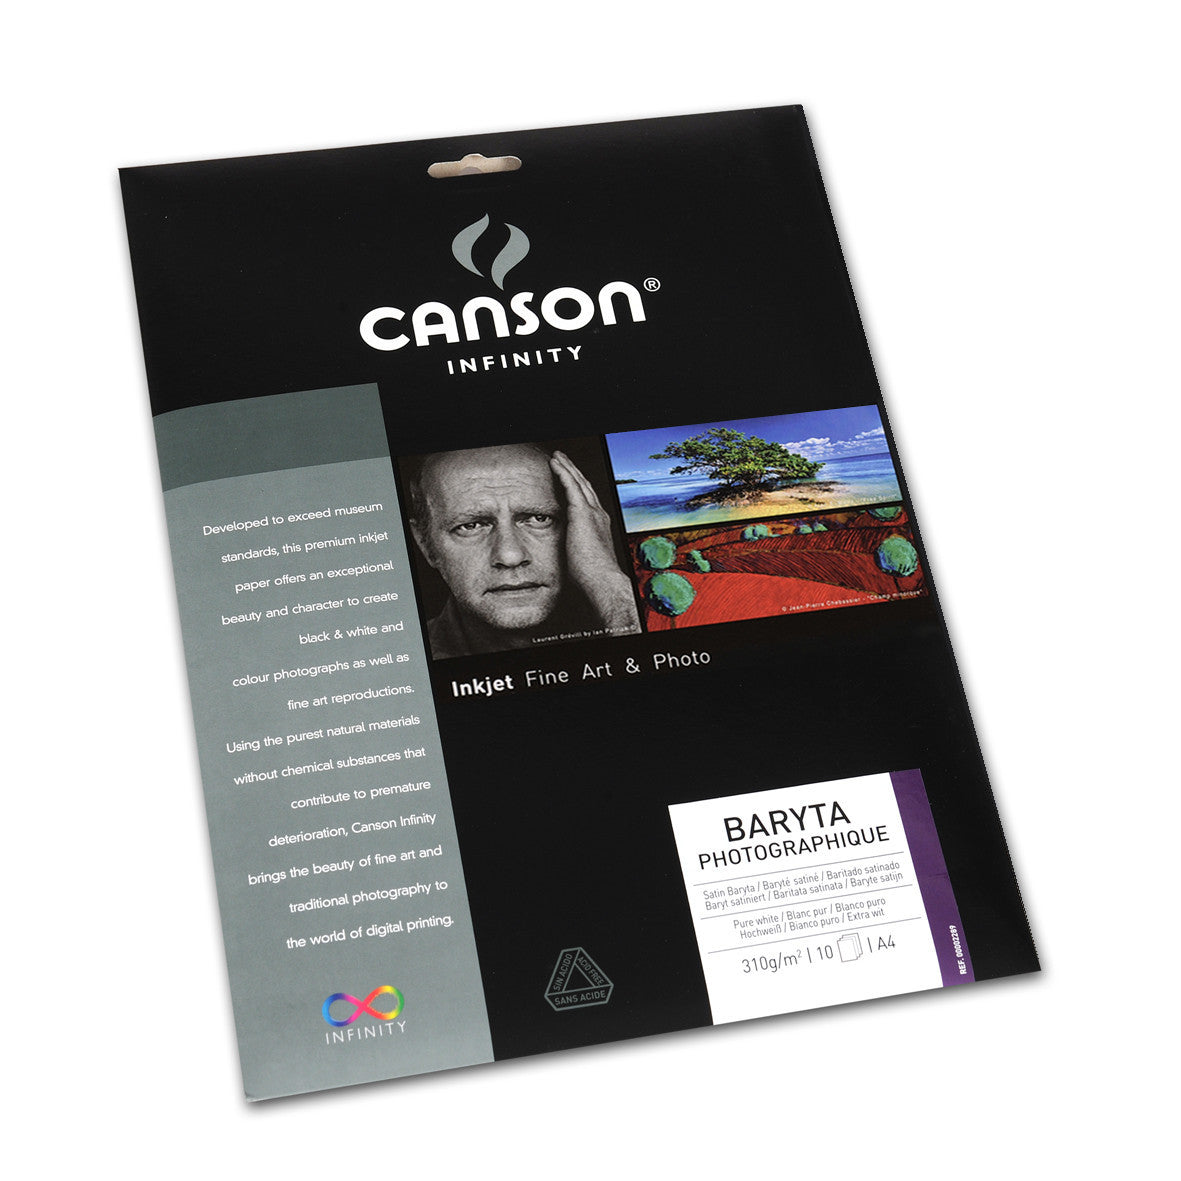 Canson Infinity Baryta Photographique - 310gsm - A4 - 10 sheets - Wall Your Photos